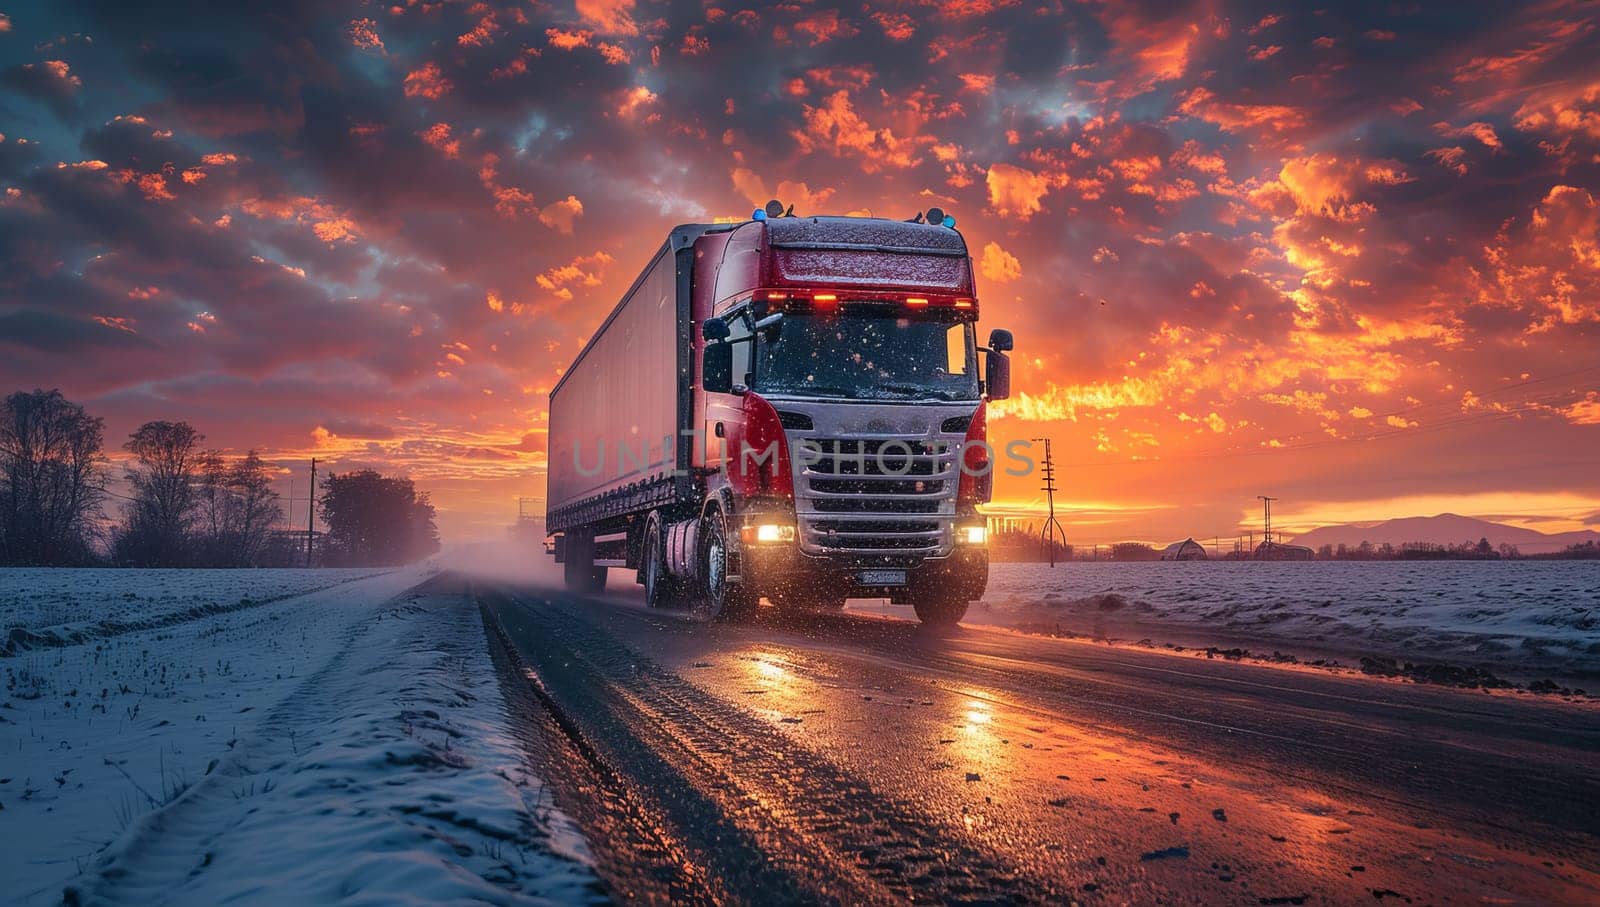 Truck on the road at sunset. Freight transportation and logistics